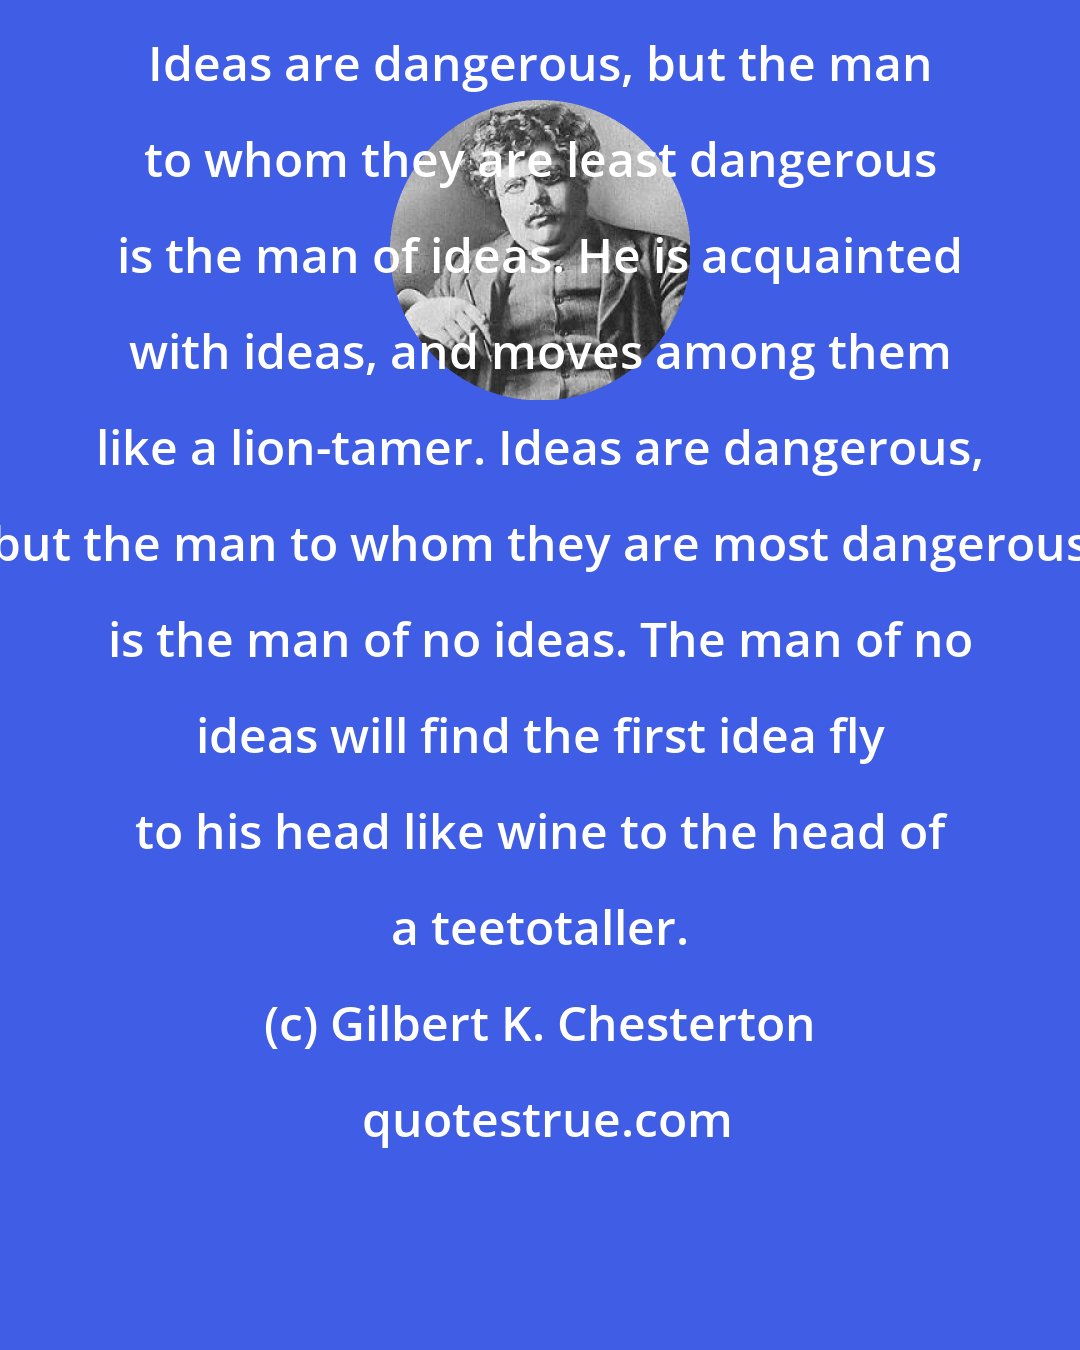 Gilbert K. Chesterton: Ideas are dangerous, but the man to whom they are least dangerous is the man of ideas. He is acquainted with ideas, and moves among them like a lion-tamer. Ideas are dangerous, but the man to whom they are most dangerous is the man of no ideas. The man of no ideas will find the first idea fly to his head like wine to the head of a teetotaller.